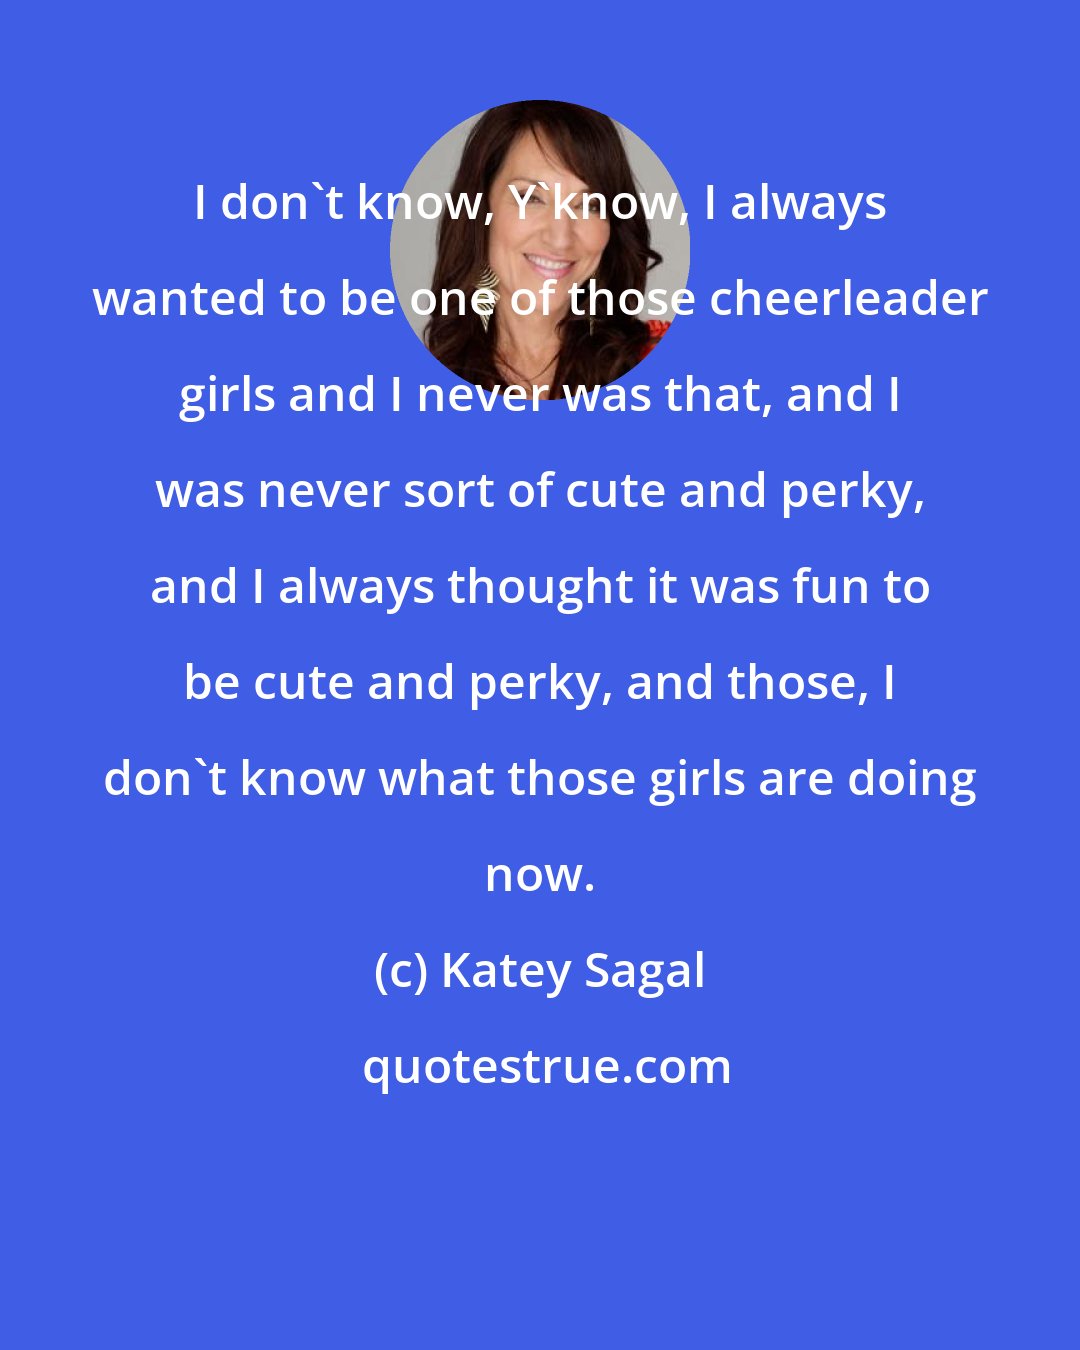 Katey Sagal: I don't know, Y'know, I always wanted to be one of those cheerleader girls and I never was that, and I was never sort of cute and perky, and I always thought it was fun to be cute and perky, and those, I don't know what those girls are doing now.